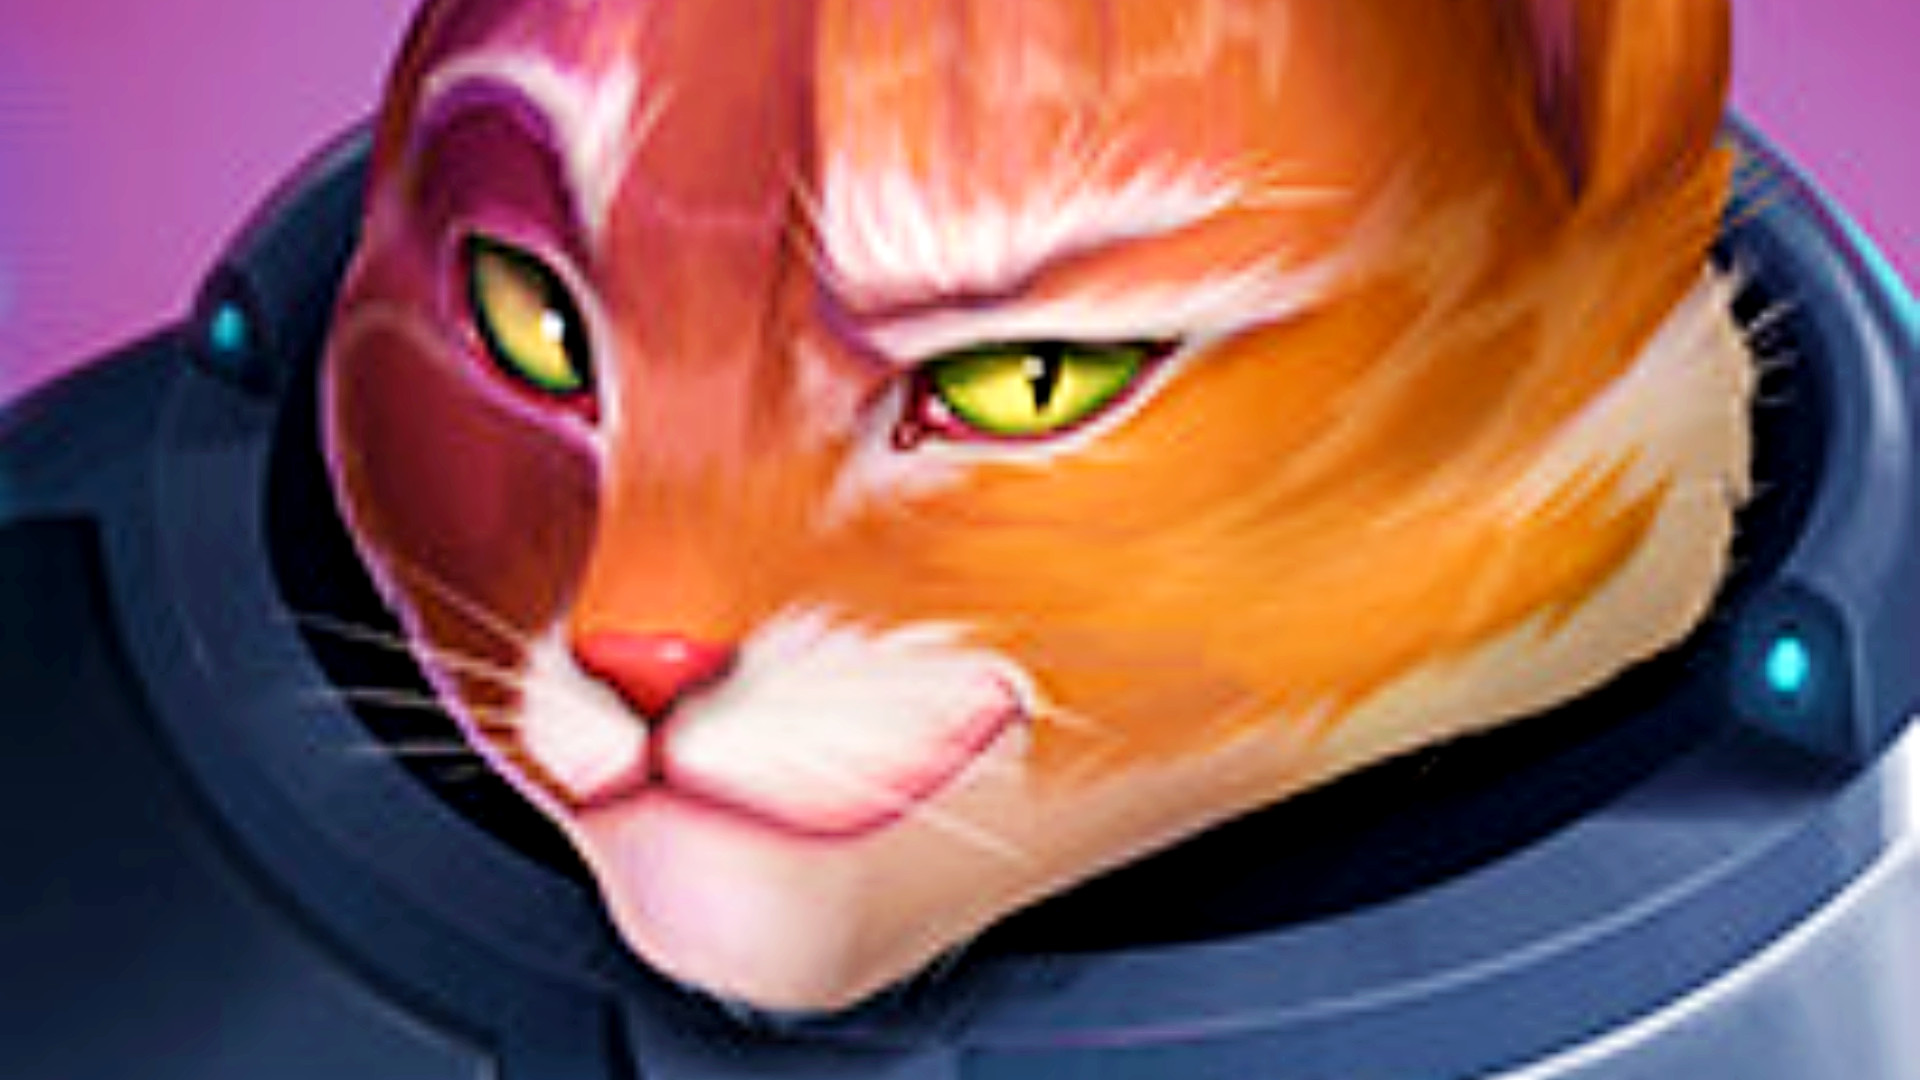 New Steam strategy game is FTL meets XCOM with cats, and it's out soon